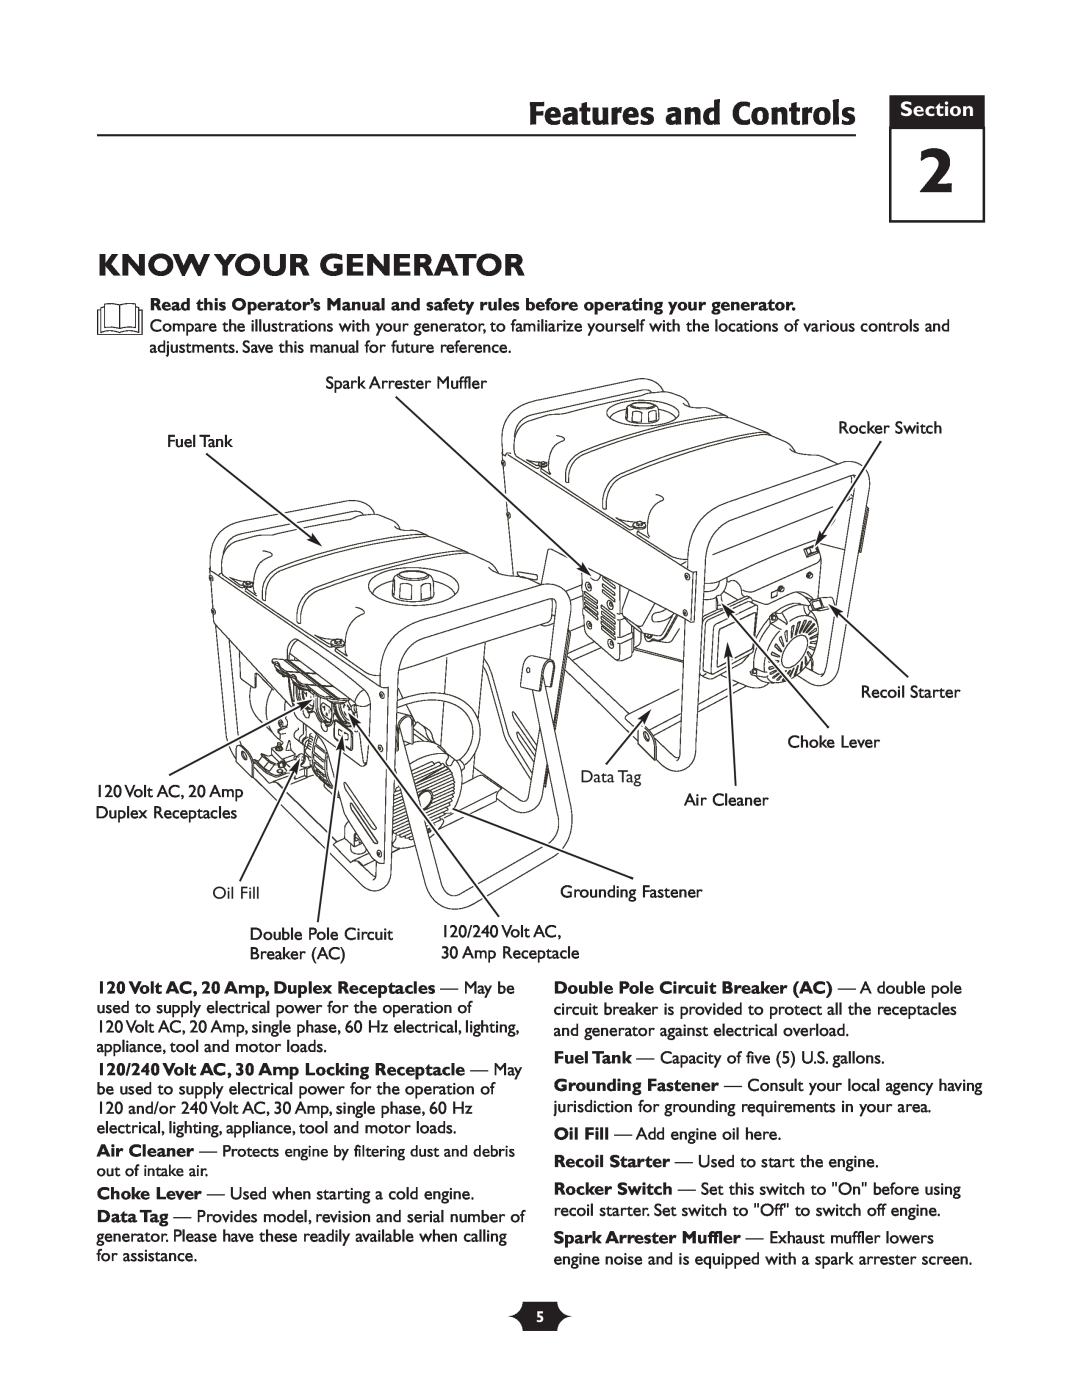 Troy-Bilt 030245 manual Features and Controls Section, Know Your Generator 